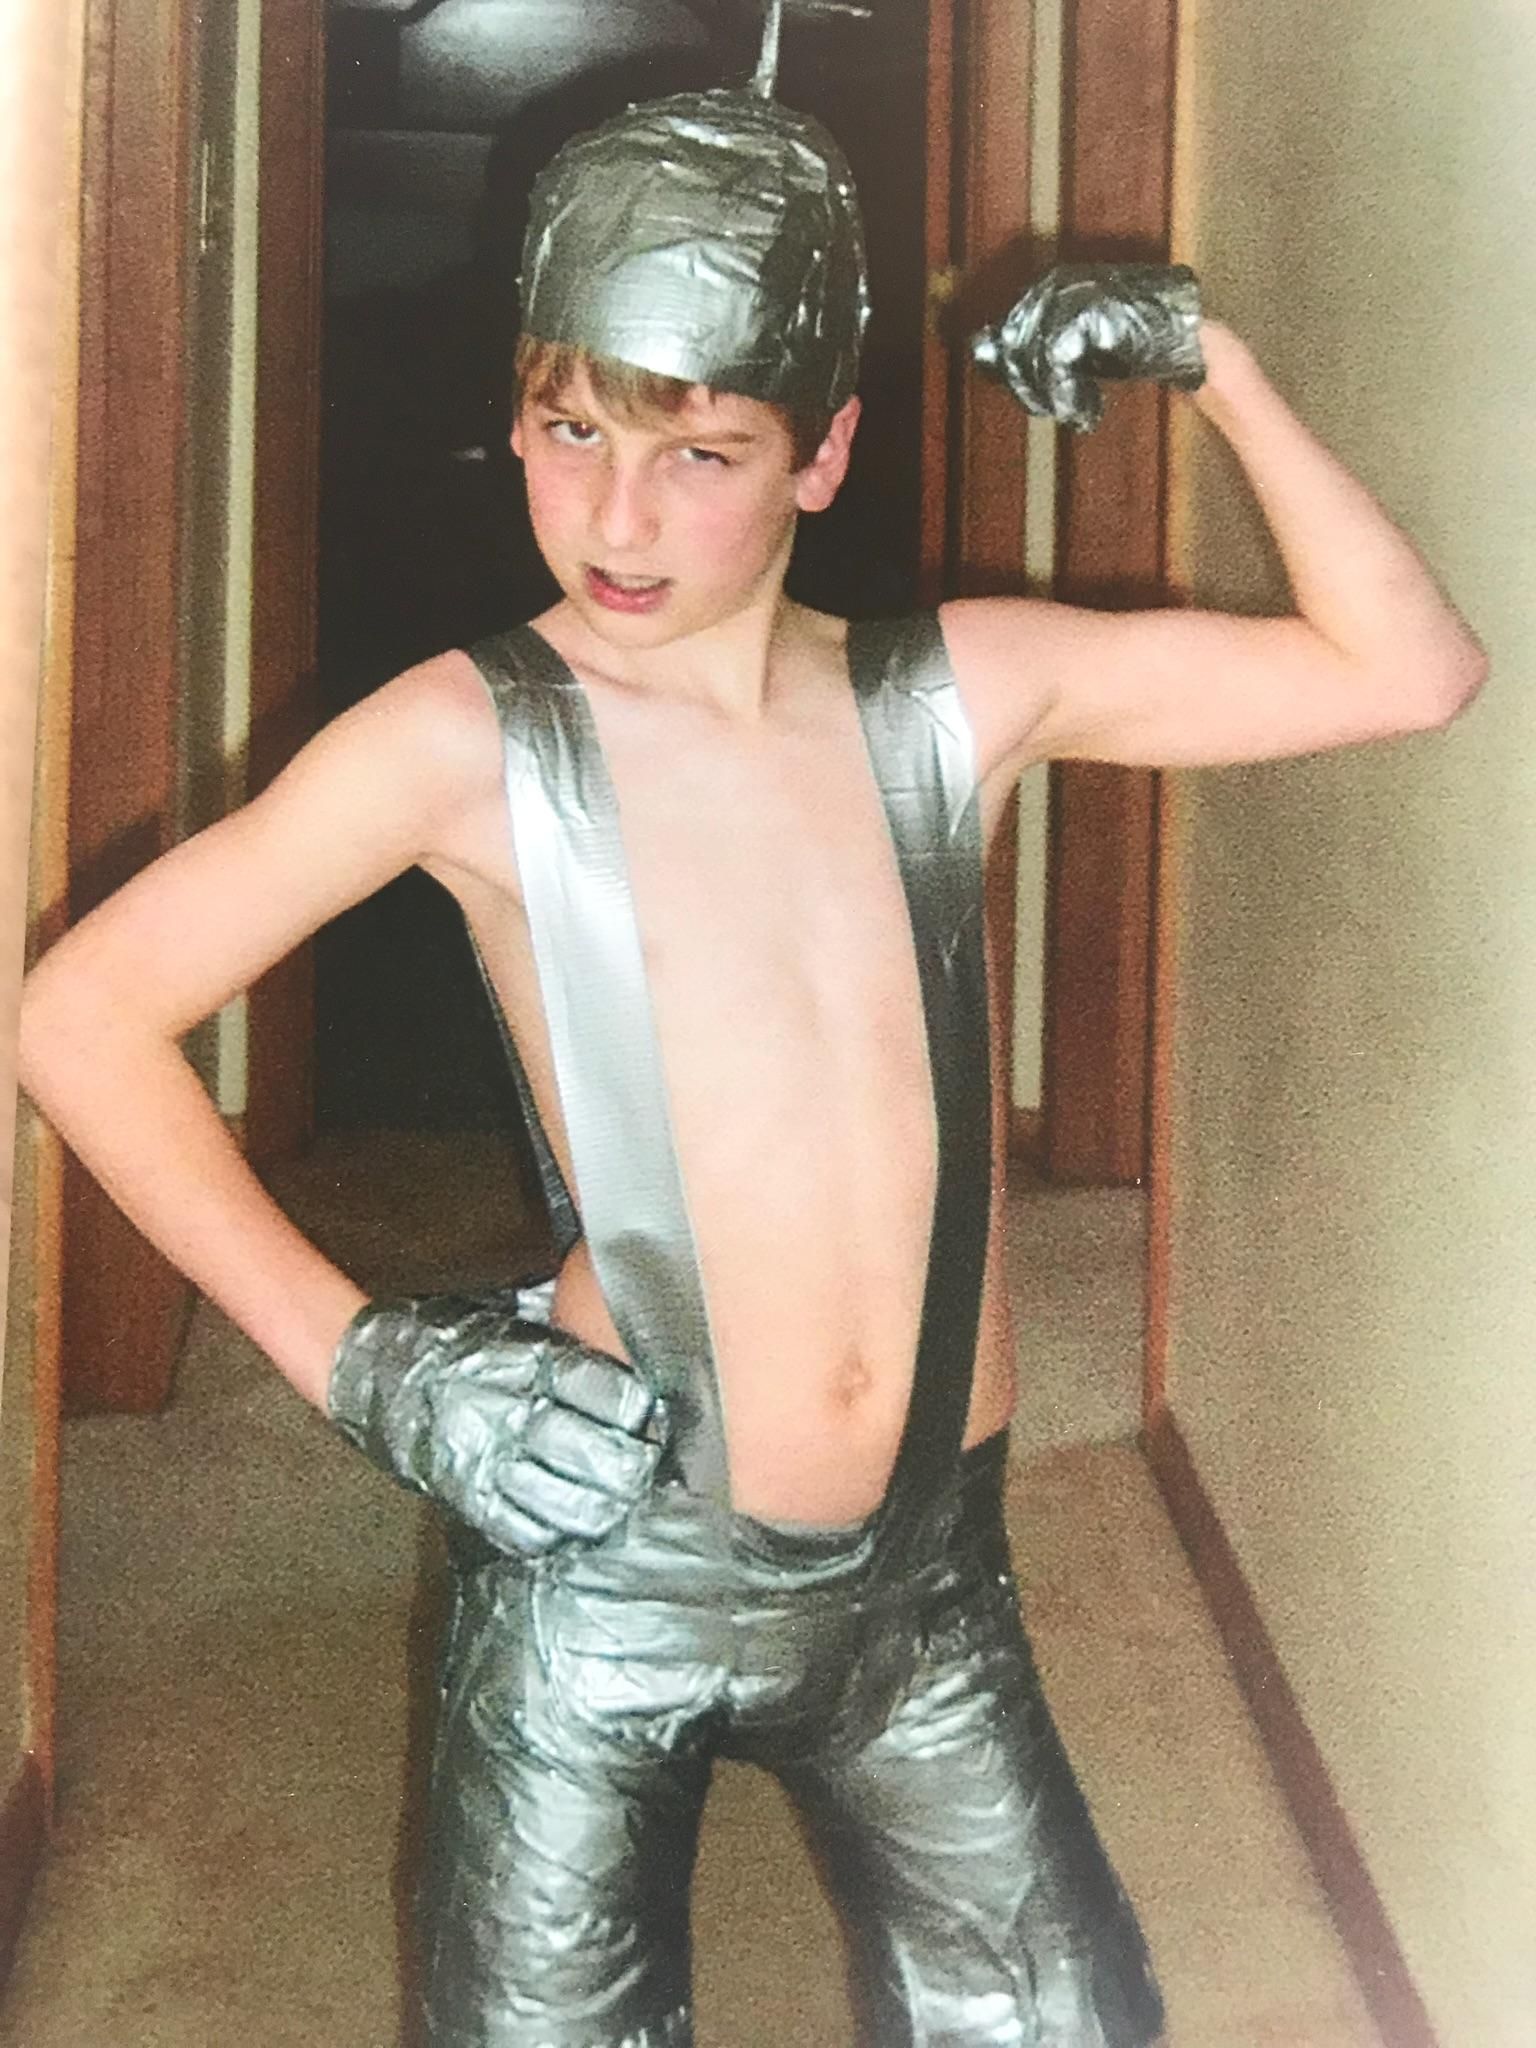 My mom dug up this old photo of me in my homemade duct tape suit